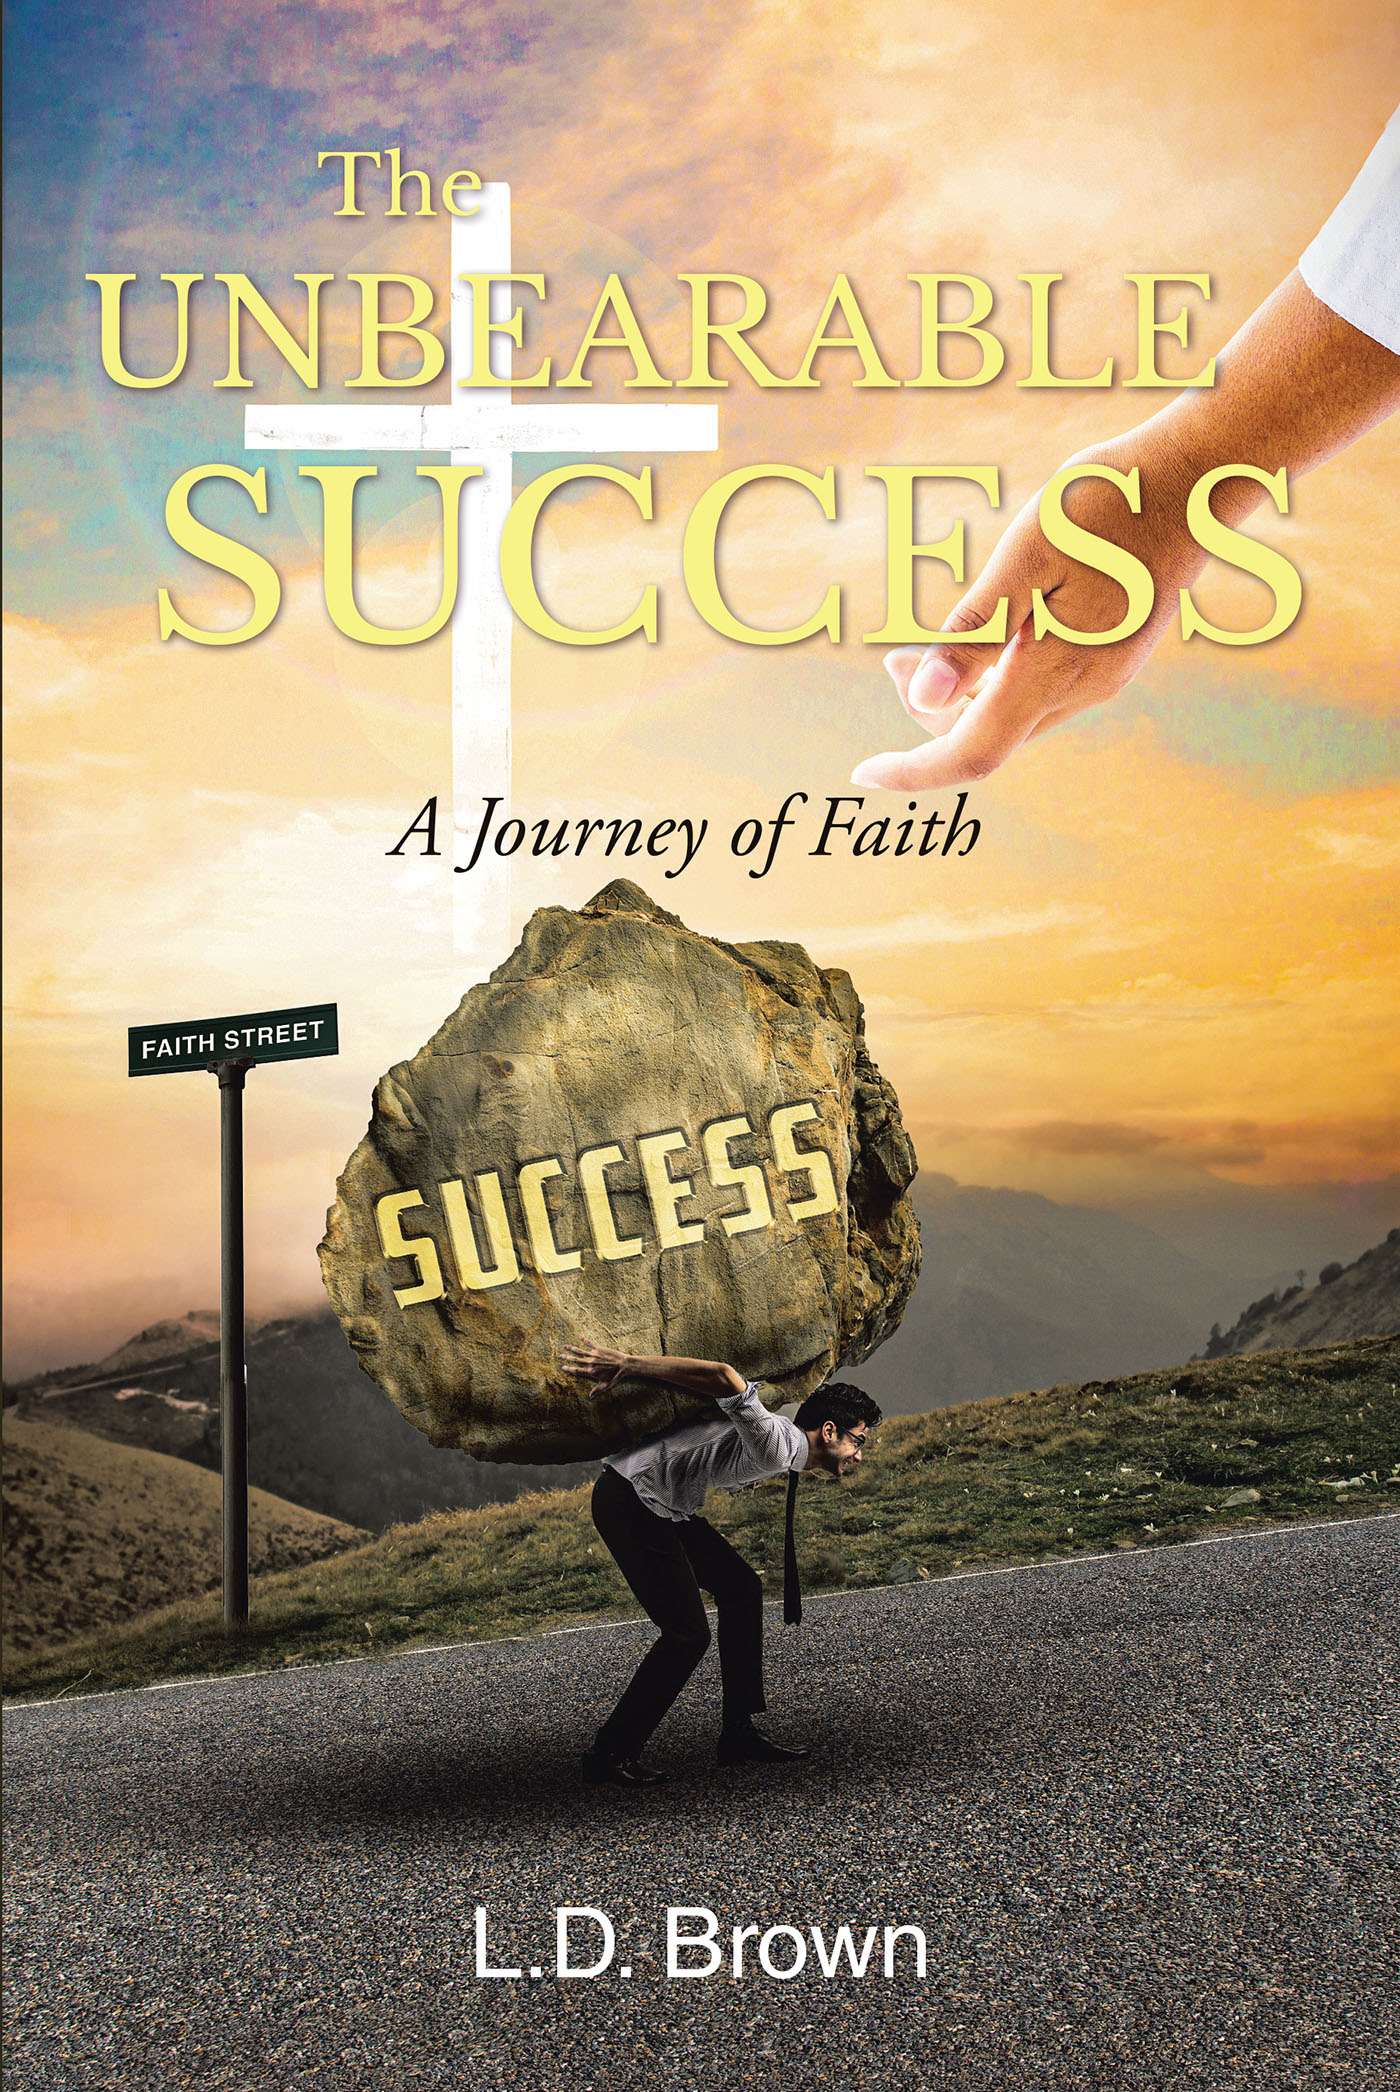 L.D. Brown’s Newly Released "The Unbearable Success: A Journey of Faith" is an Inspiring Story of Overcoming Extreme Loss and Finding Strength in God